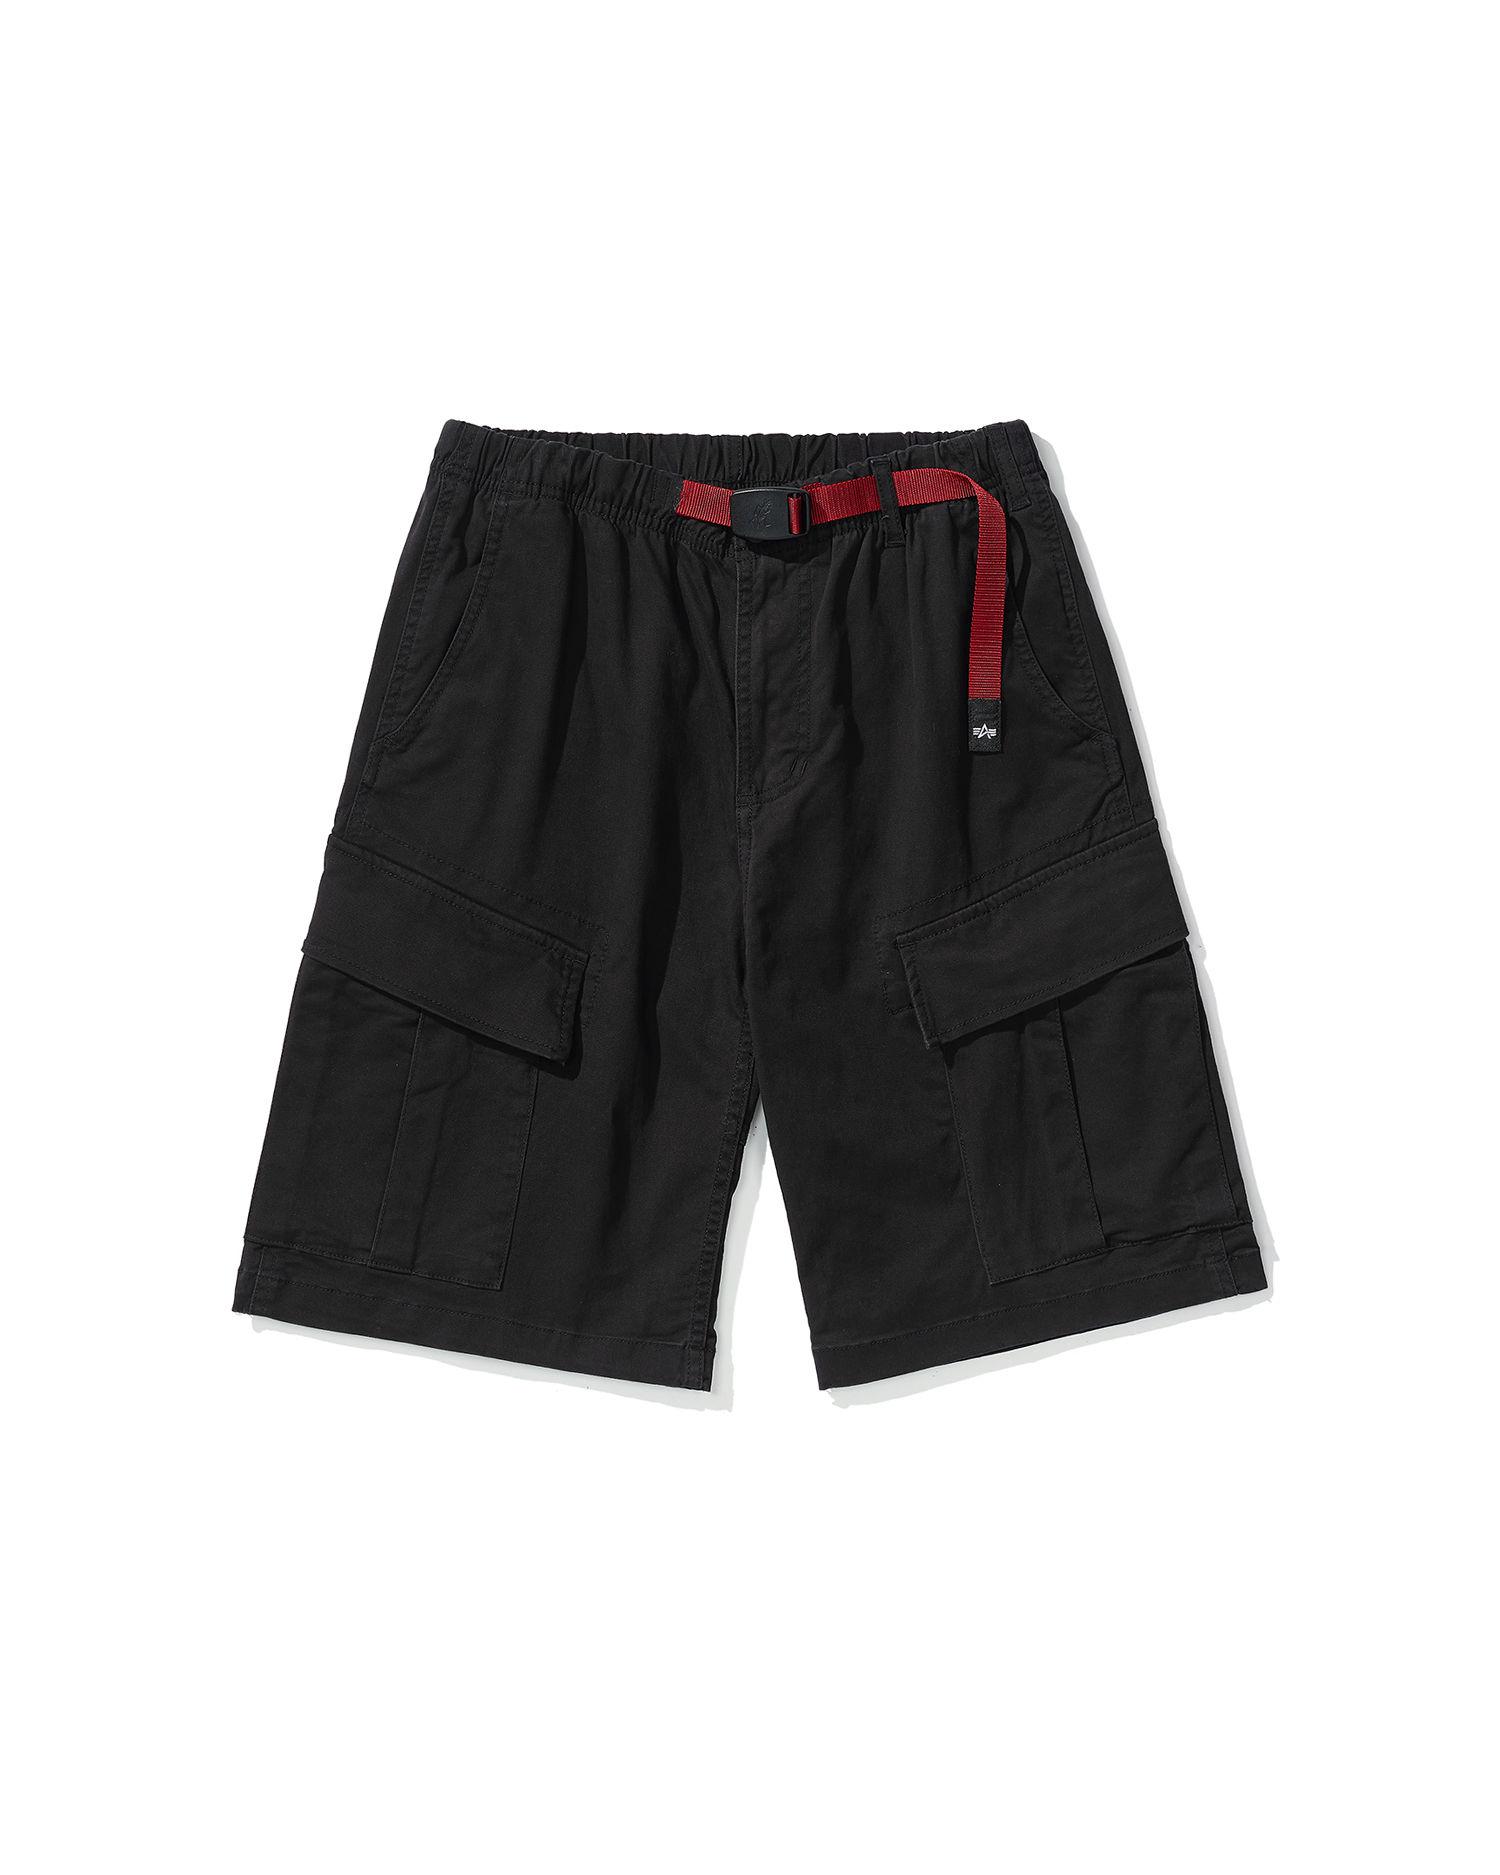 Jungle cargo shorts by ALPHA INDUSTRIES